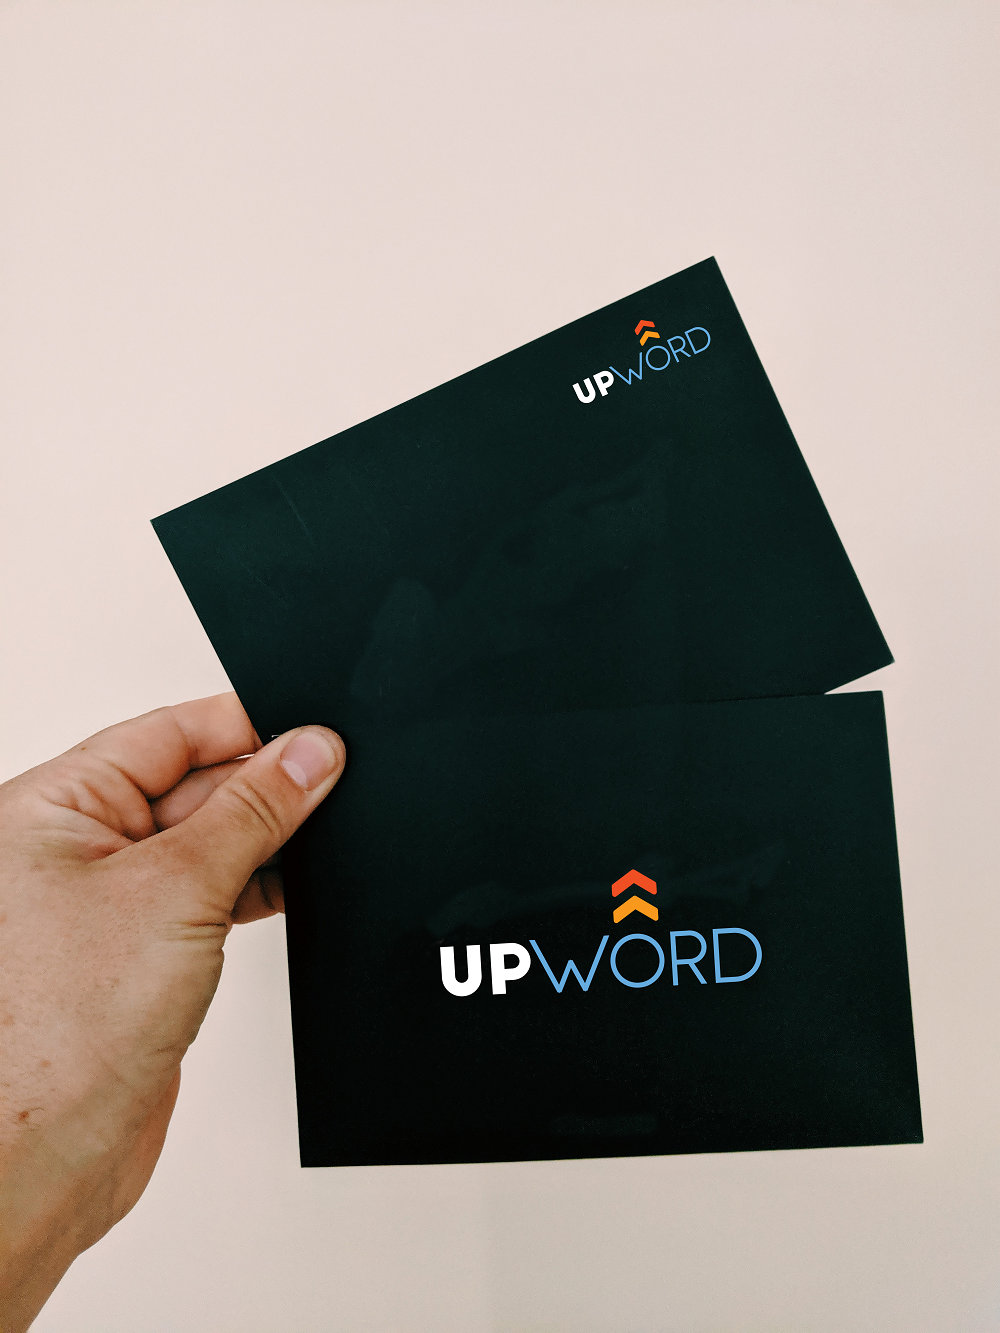 UPWORD is a logo created for an online editor. 